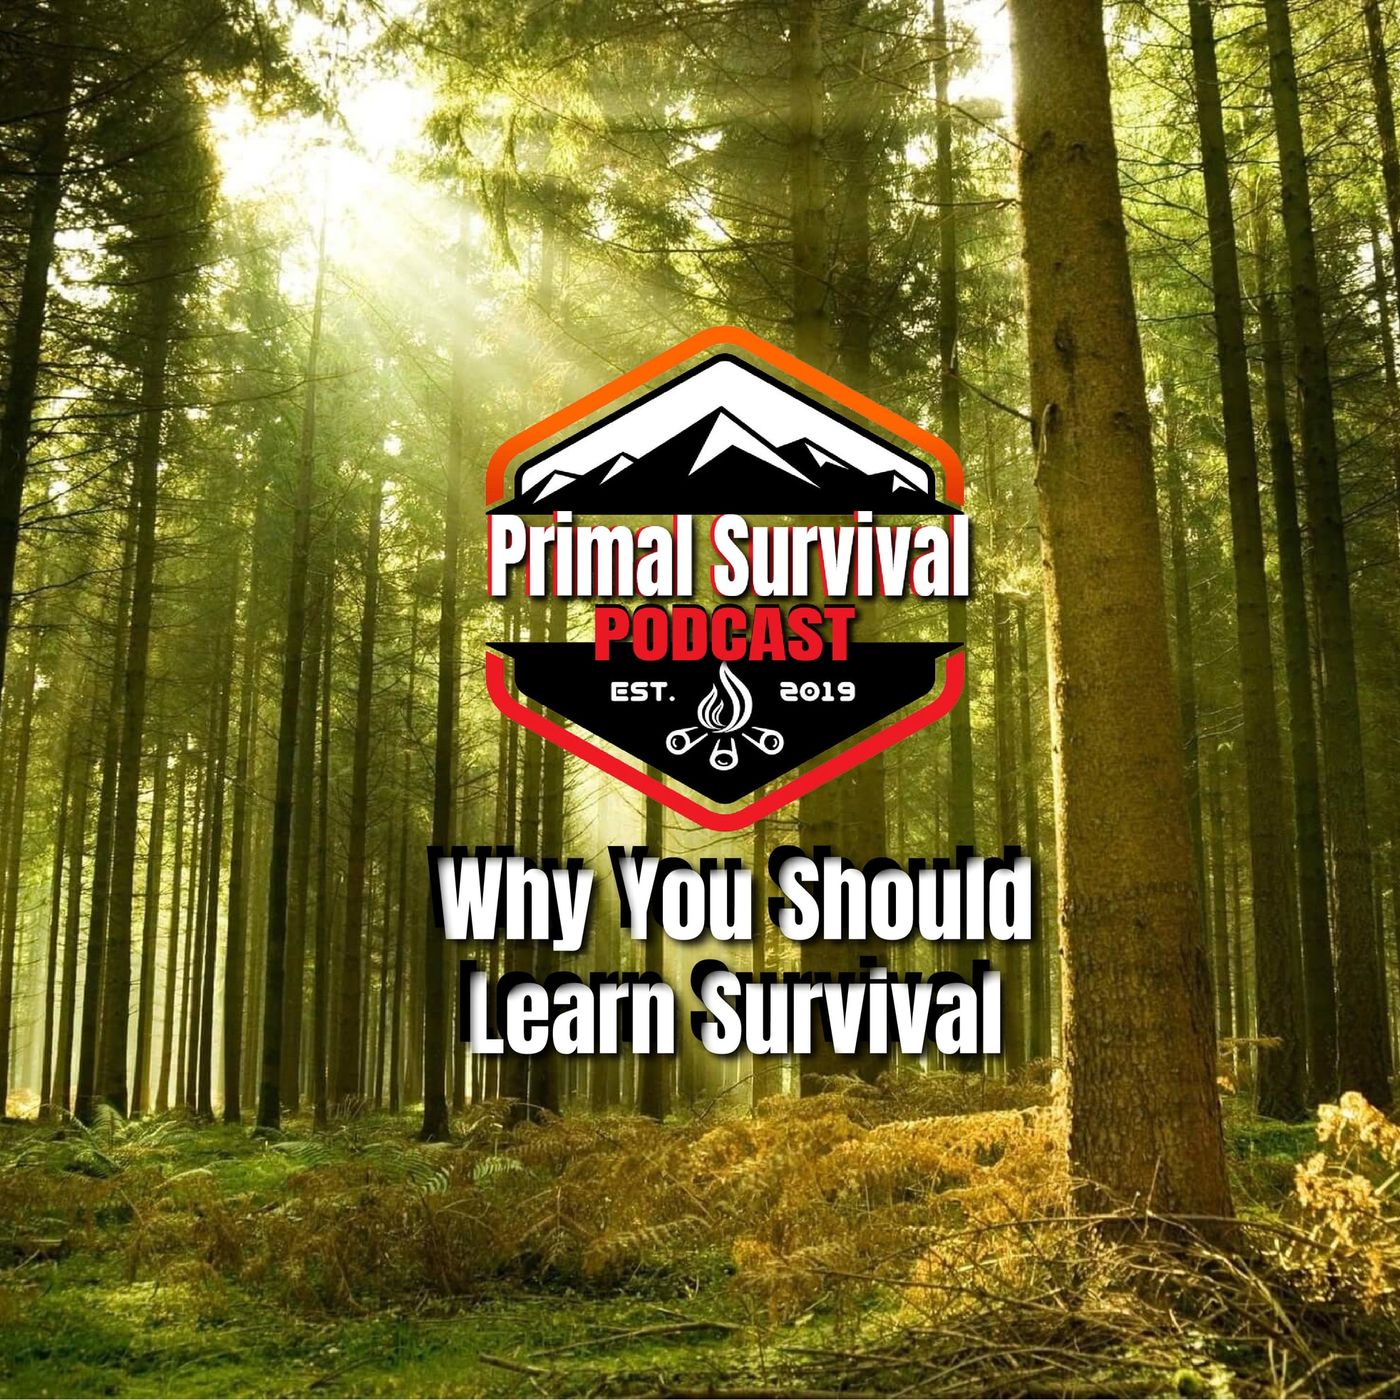 Primal Survival Podcast - Reasons To Learn Survival